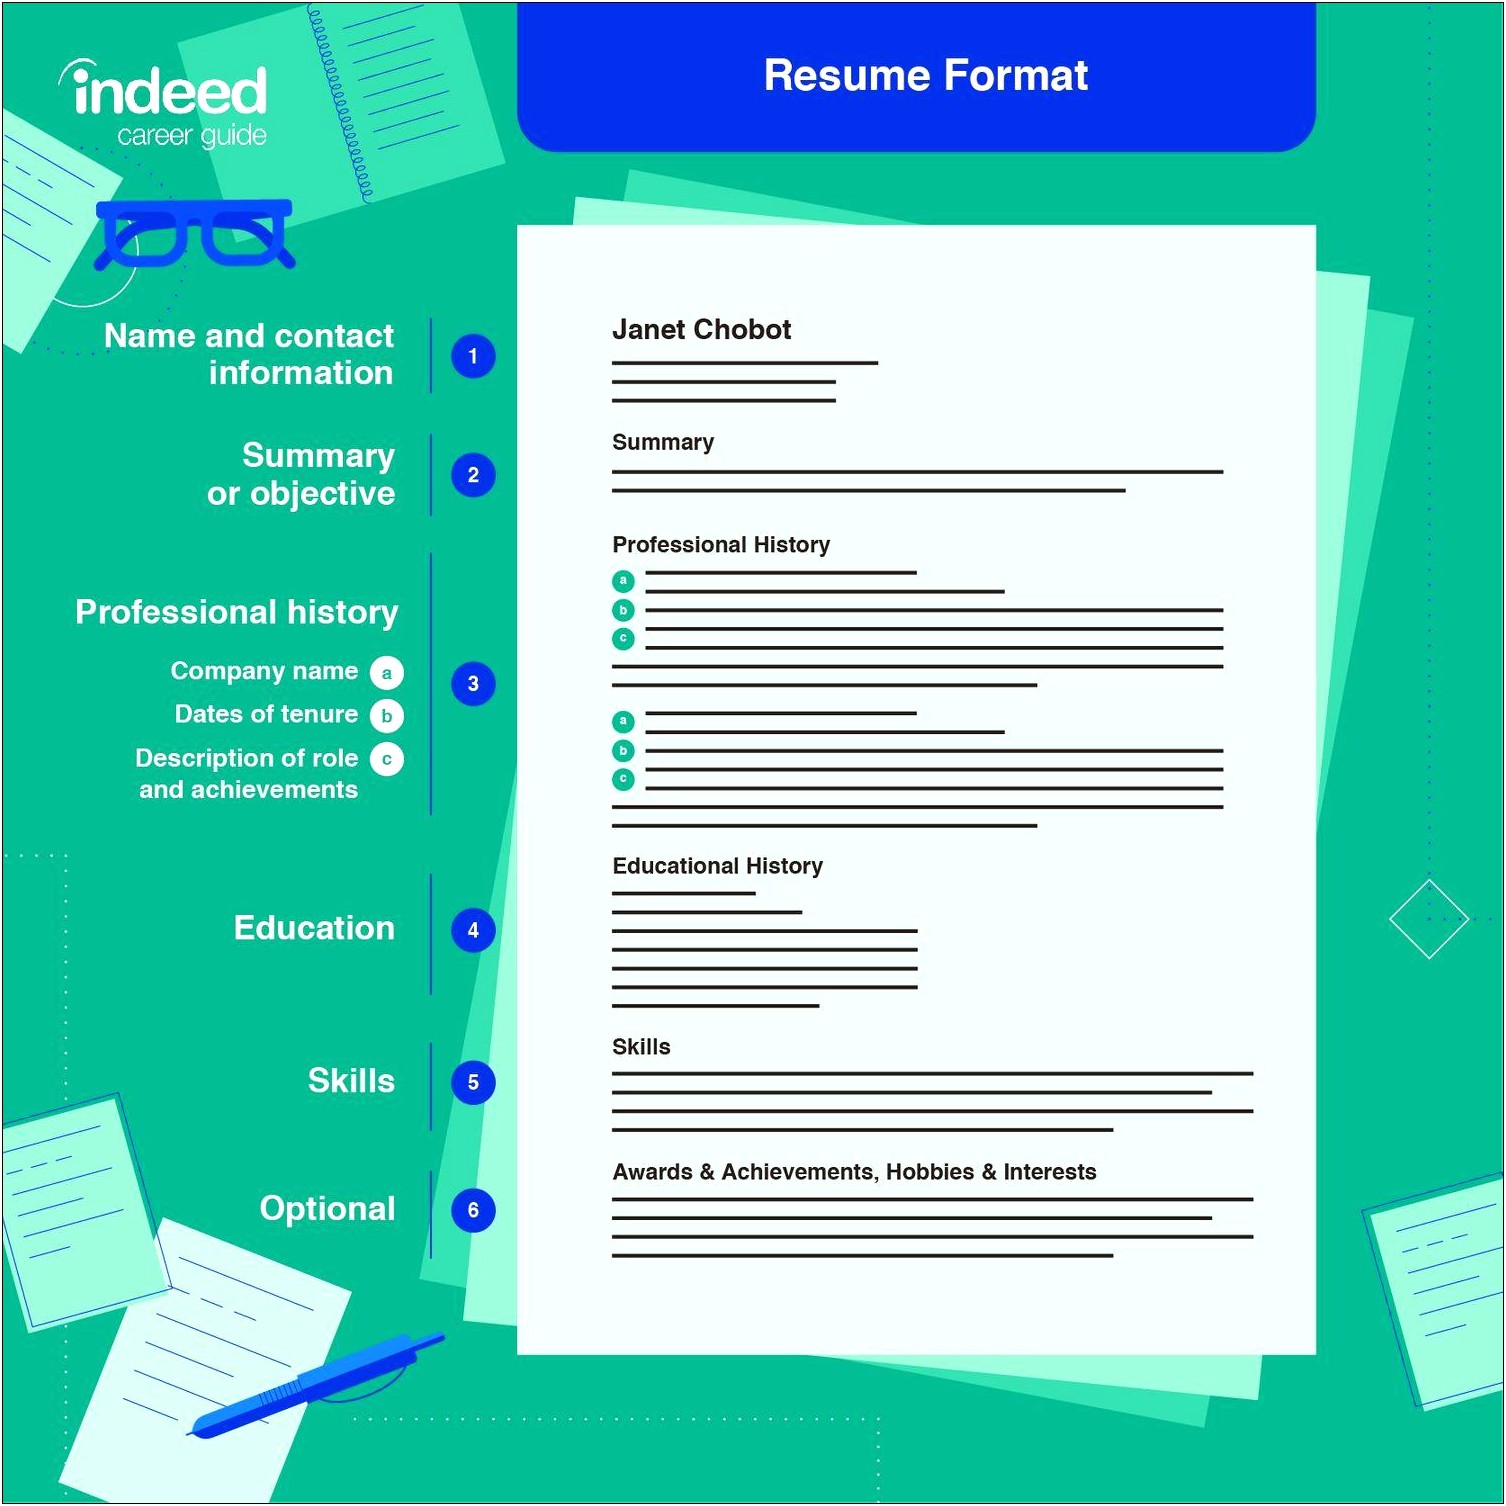 Entry Level Skills To Put On A Resume